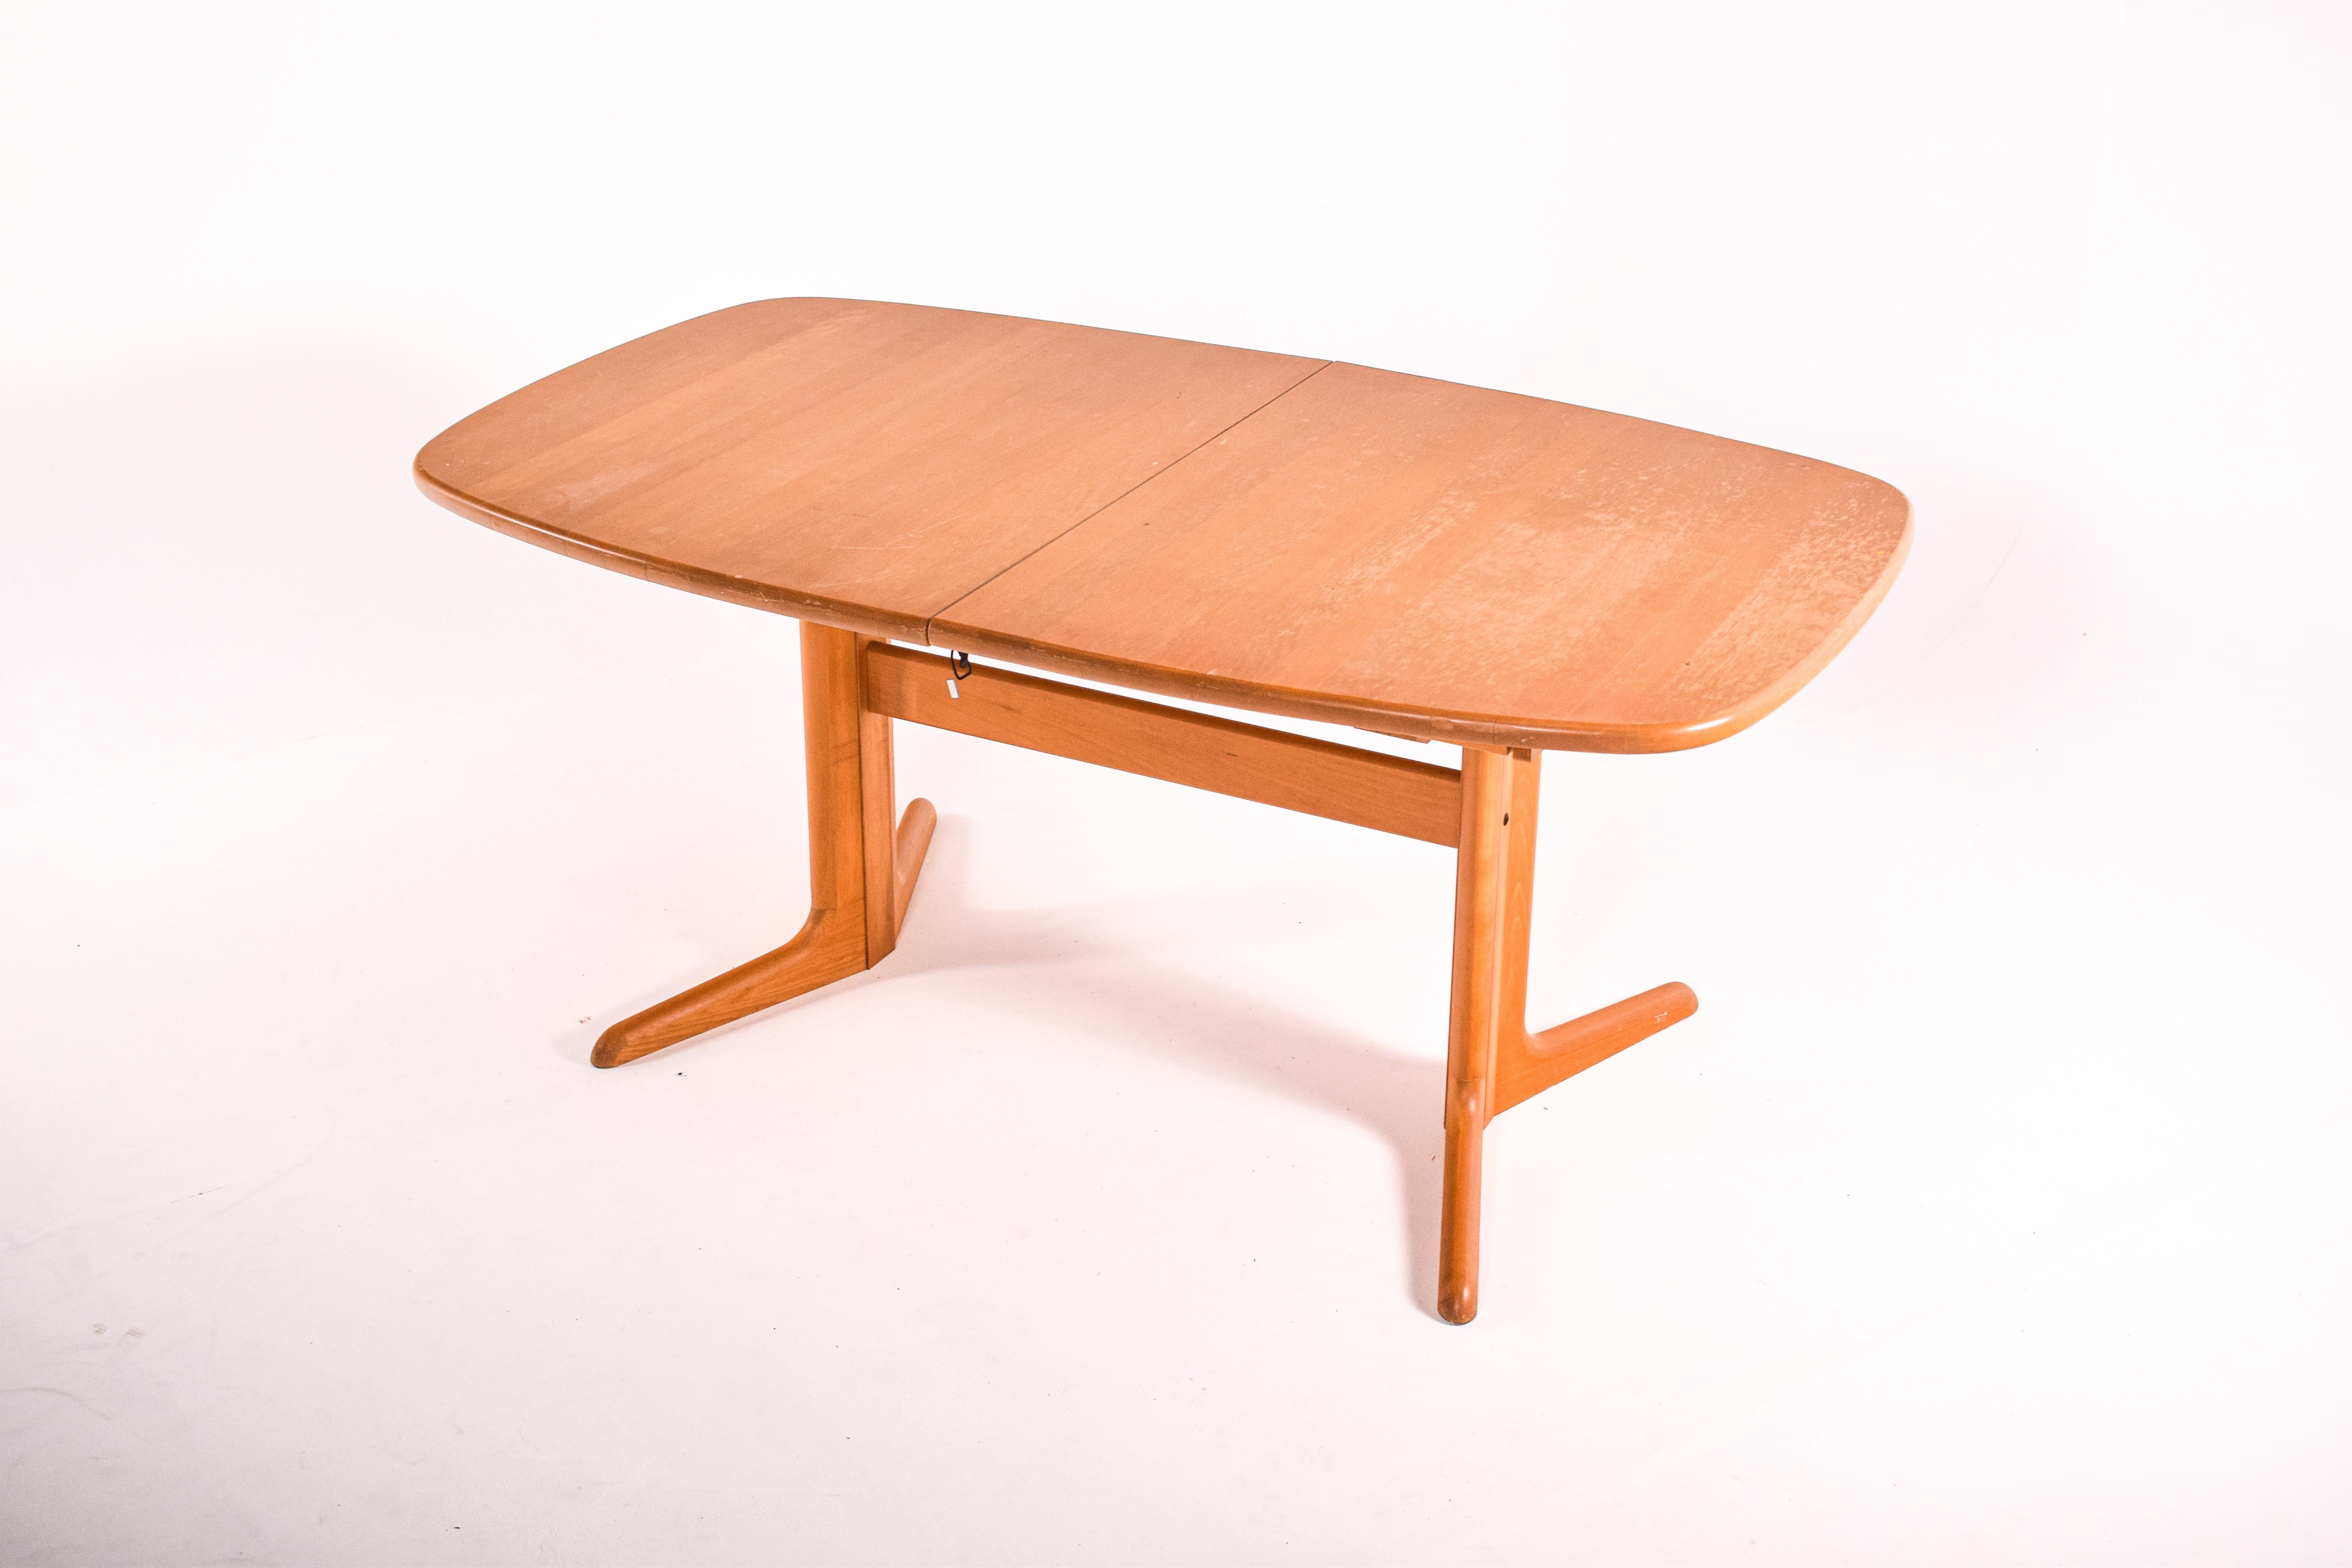 Dining table manufactured by the Danish company Skovby in the 1980s. The table has an interesting ellipse-shaped made of beech veneer. This version of the model SM78 table is slightly larger than other Danish tables and it offers excellent seating